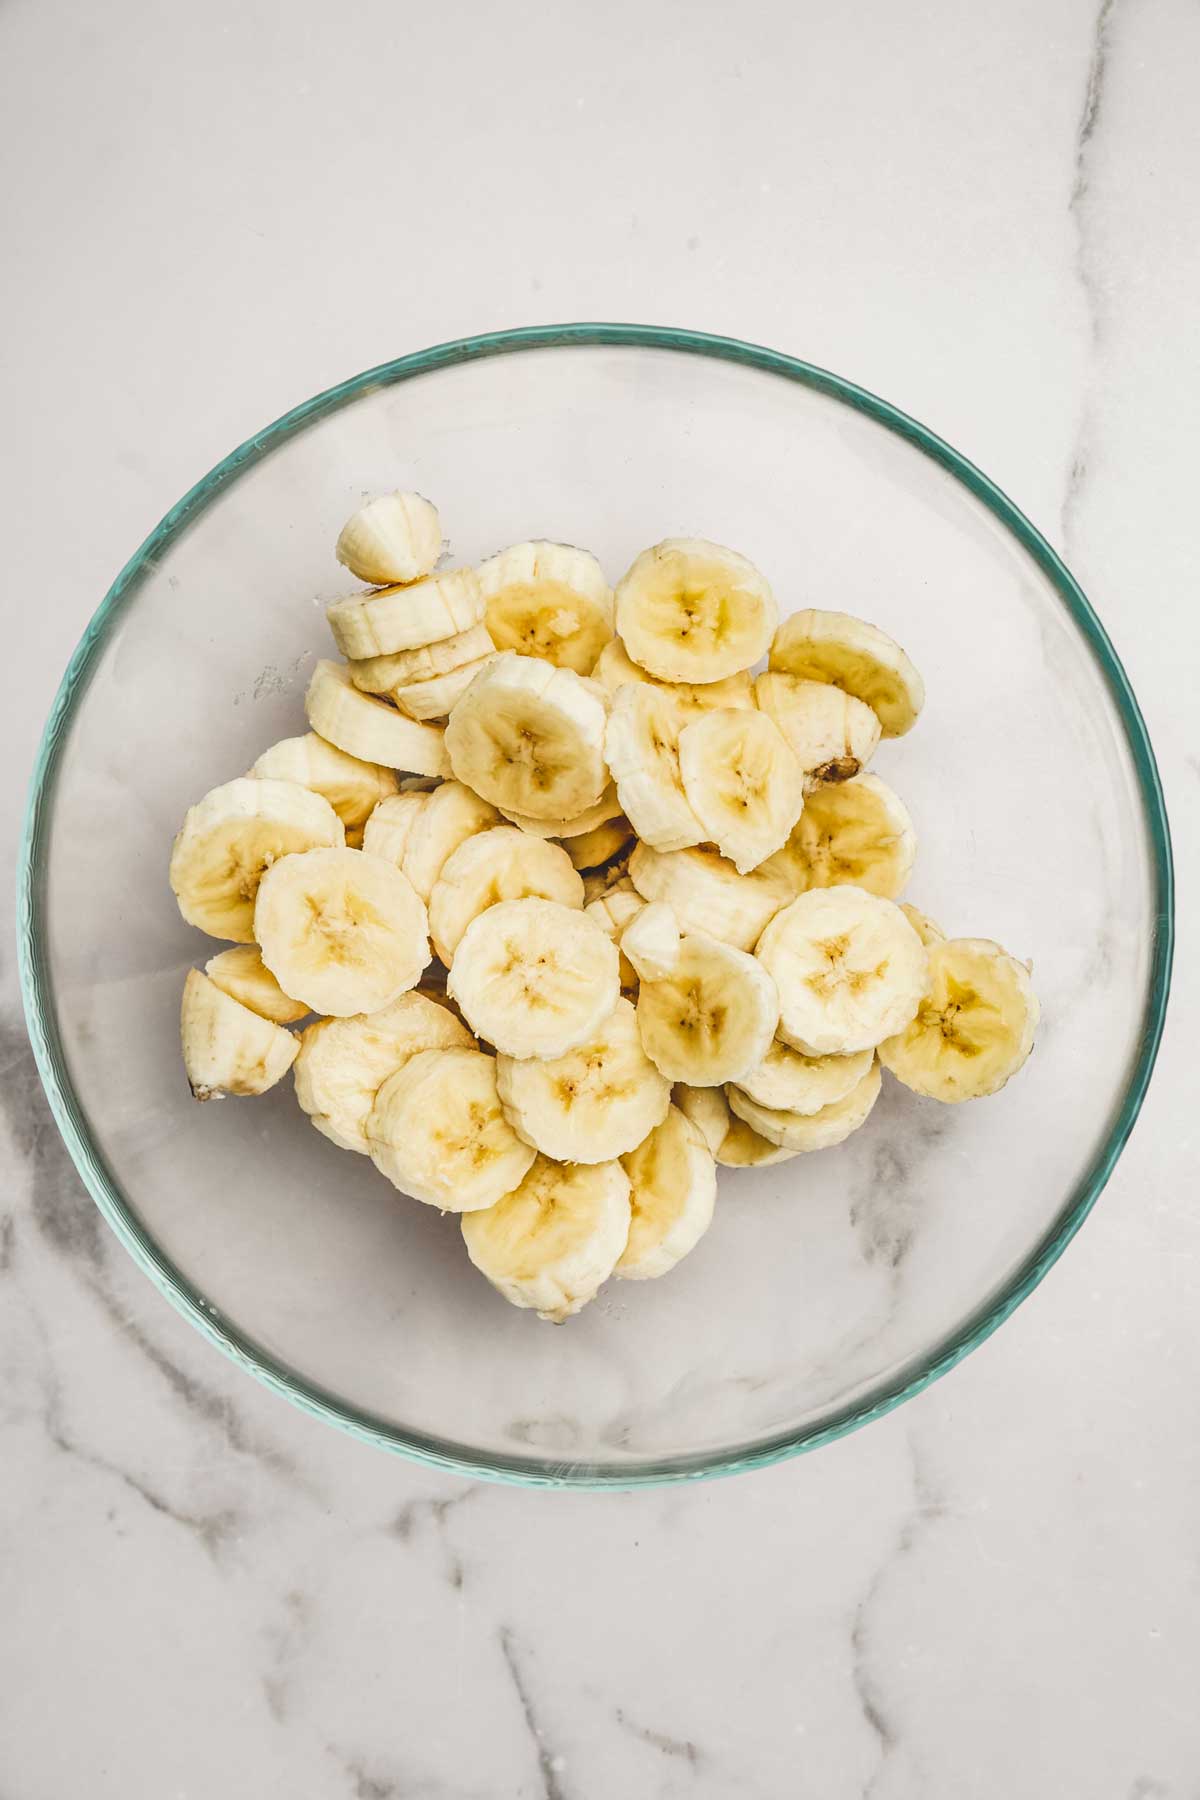 Bowl with pieces of bananas